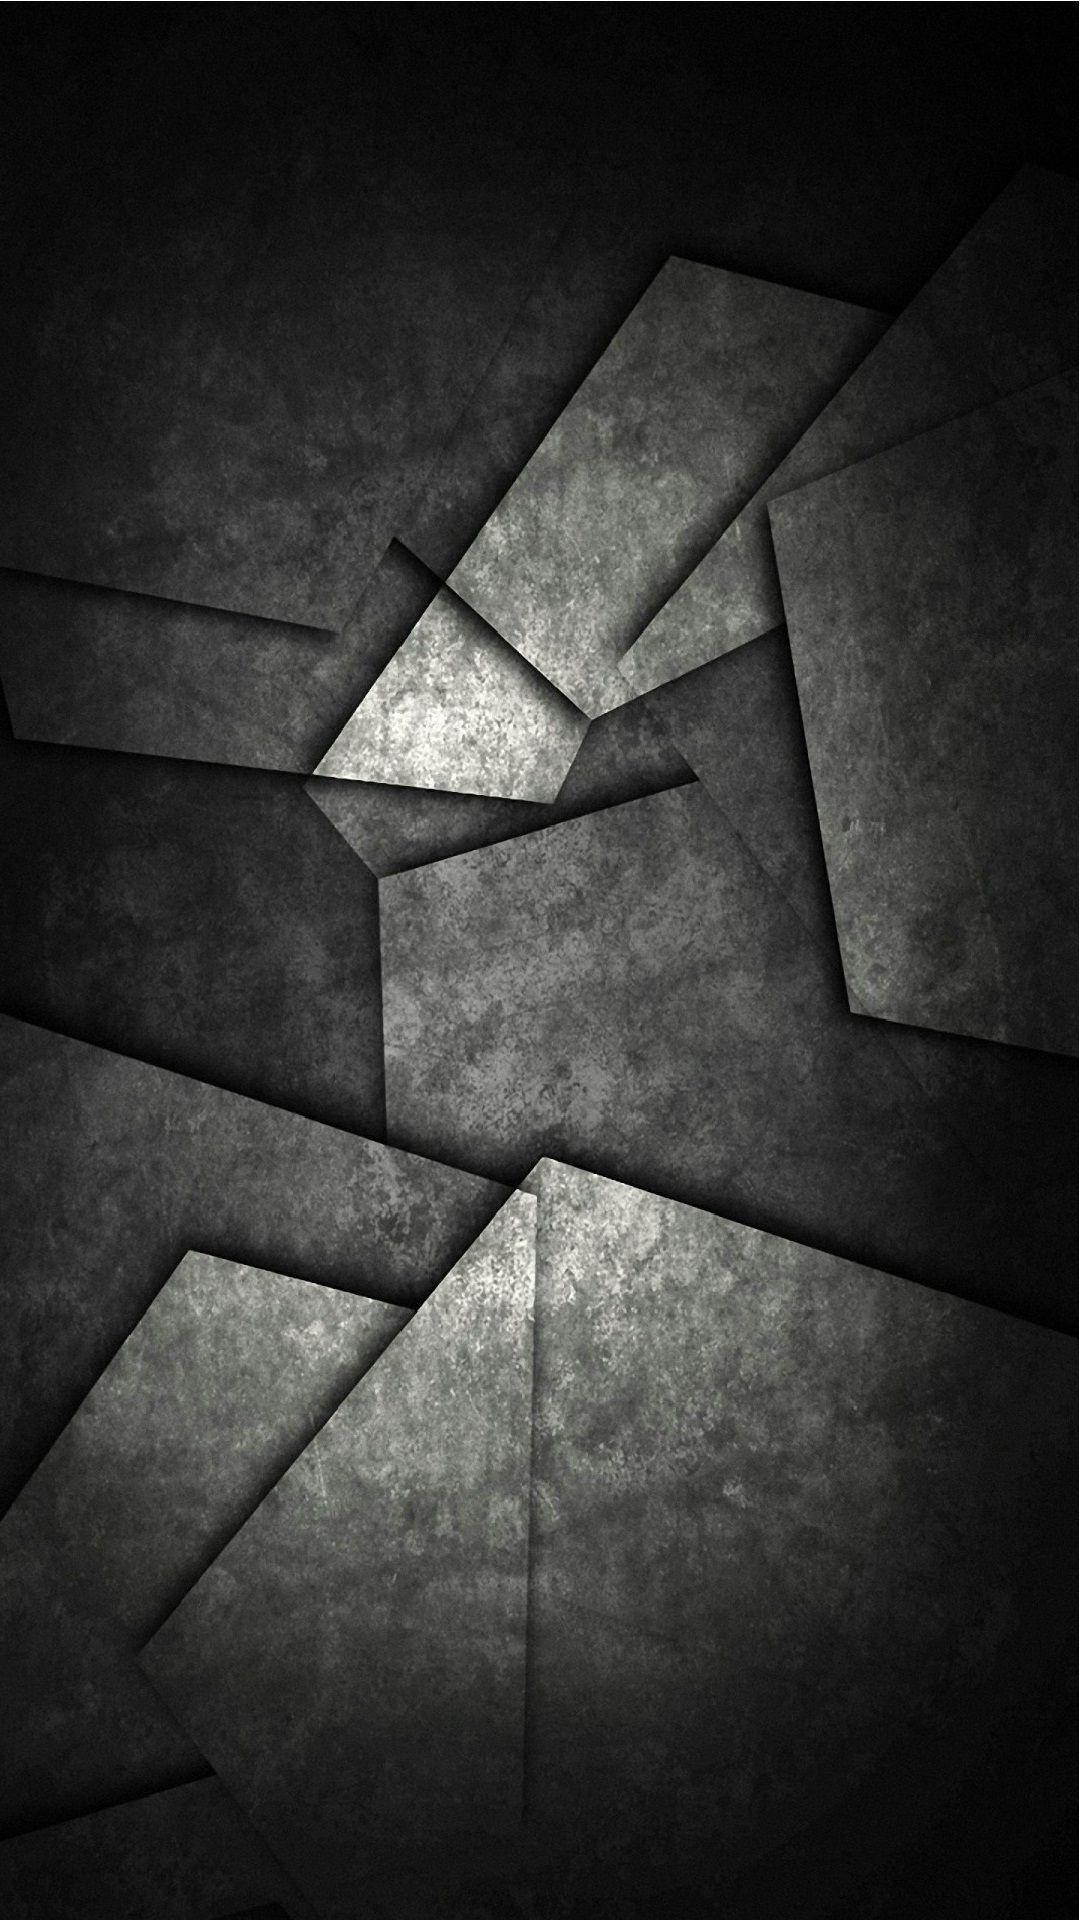 Abstract Wallpaper For Mobile Android. Best HD Wallpaper